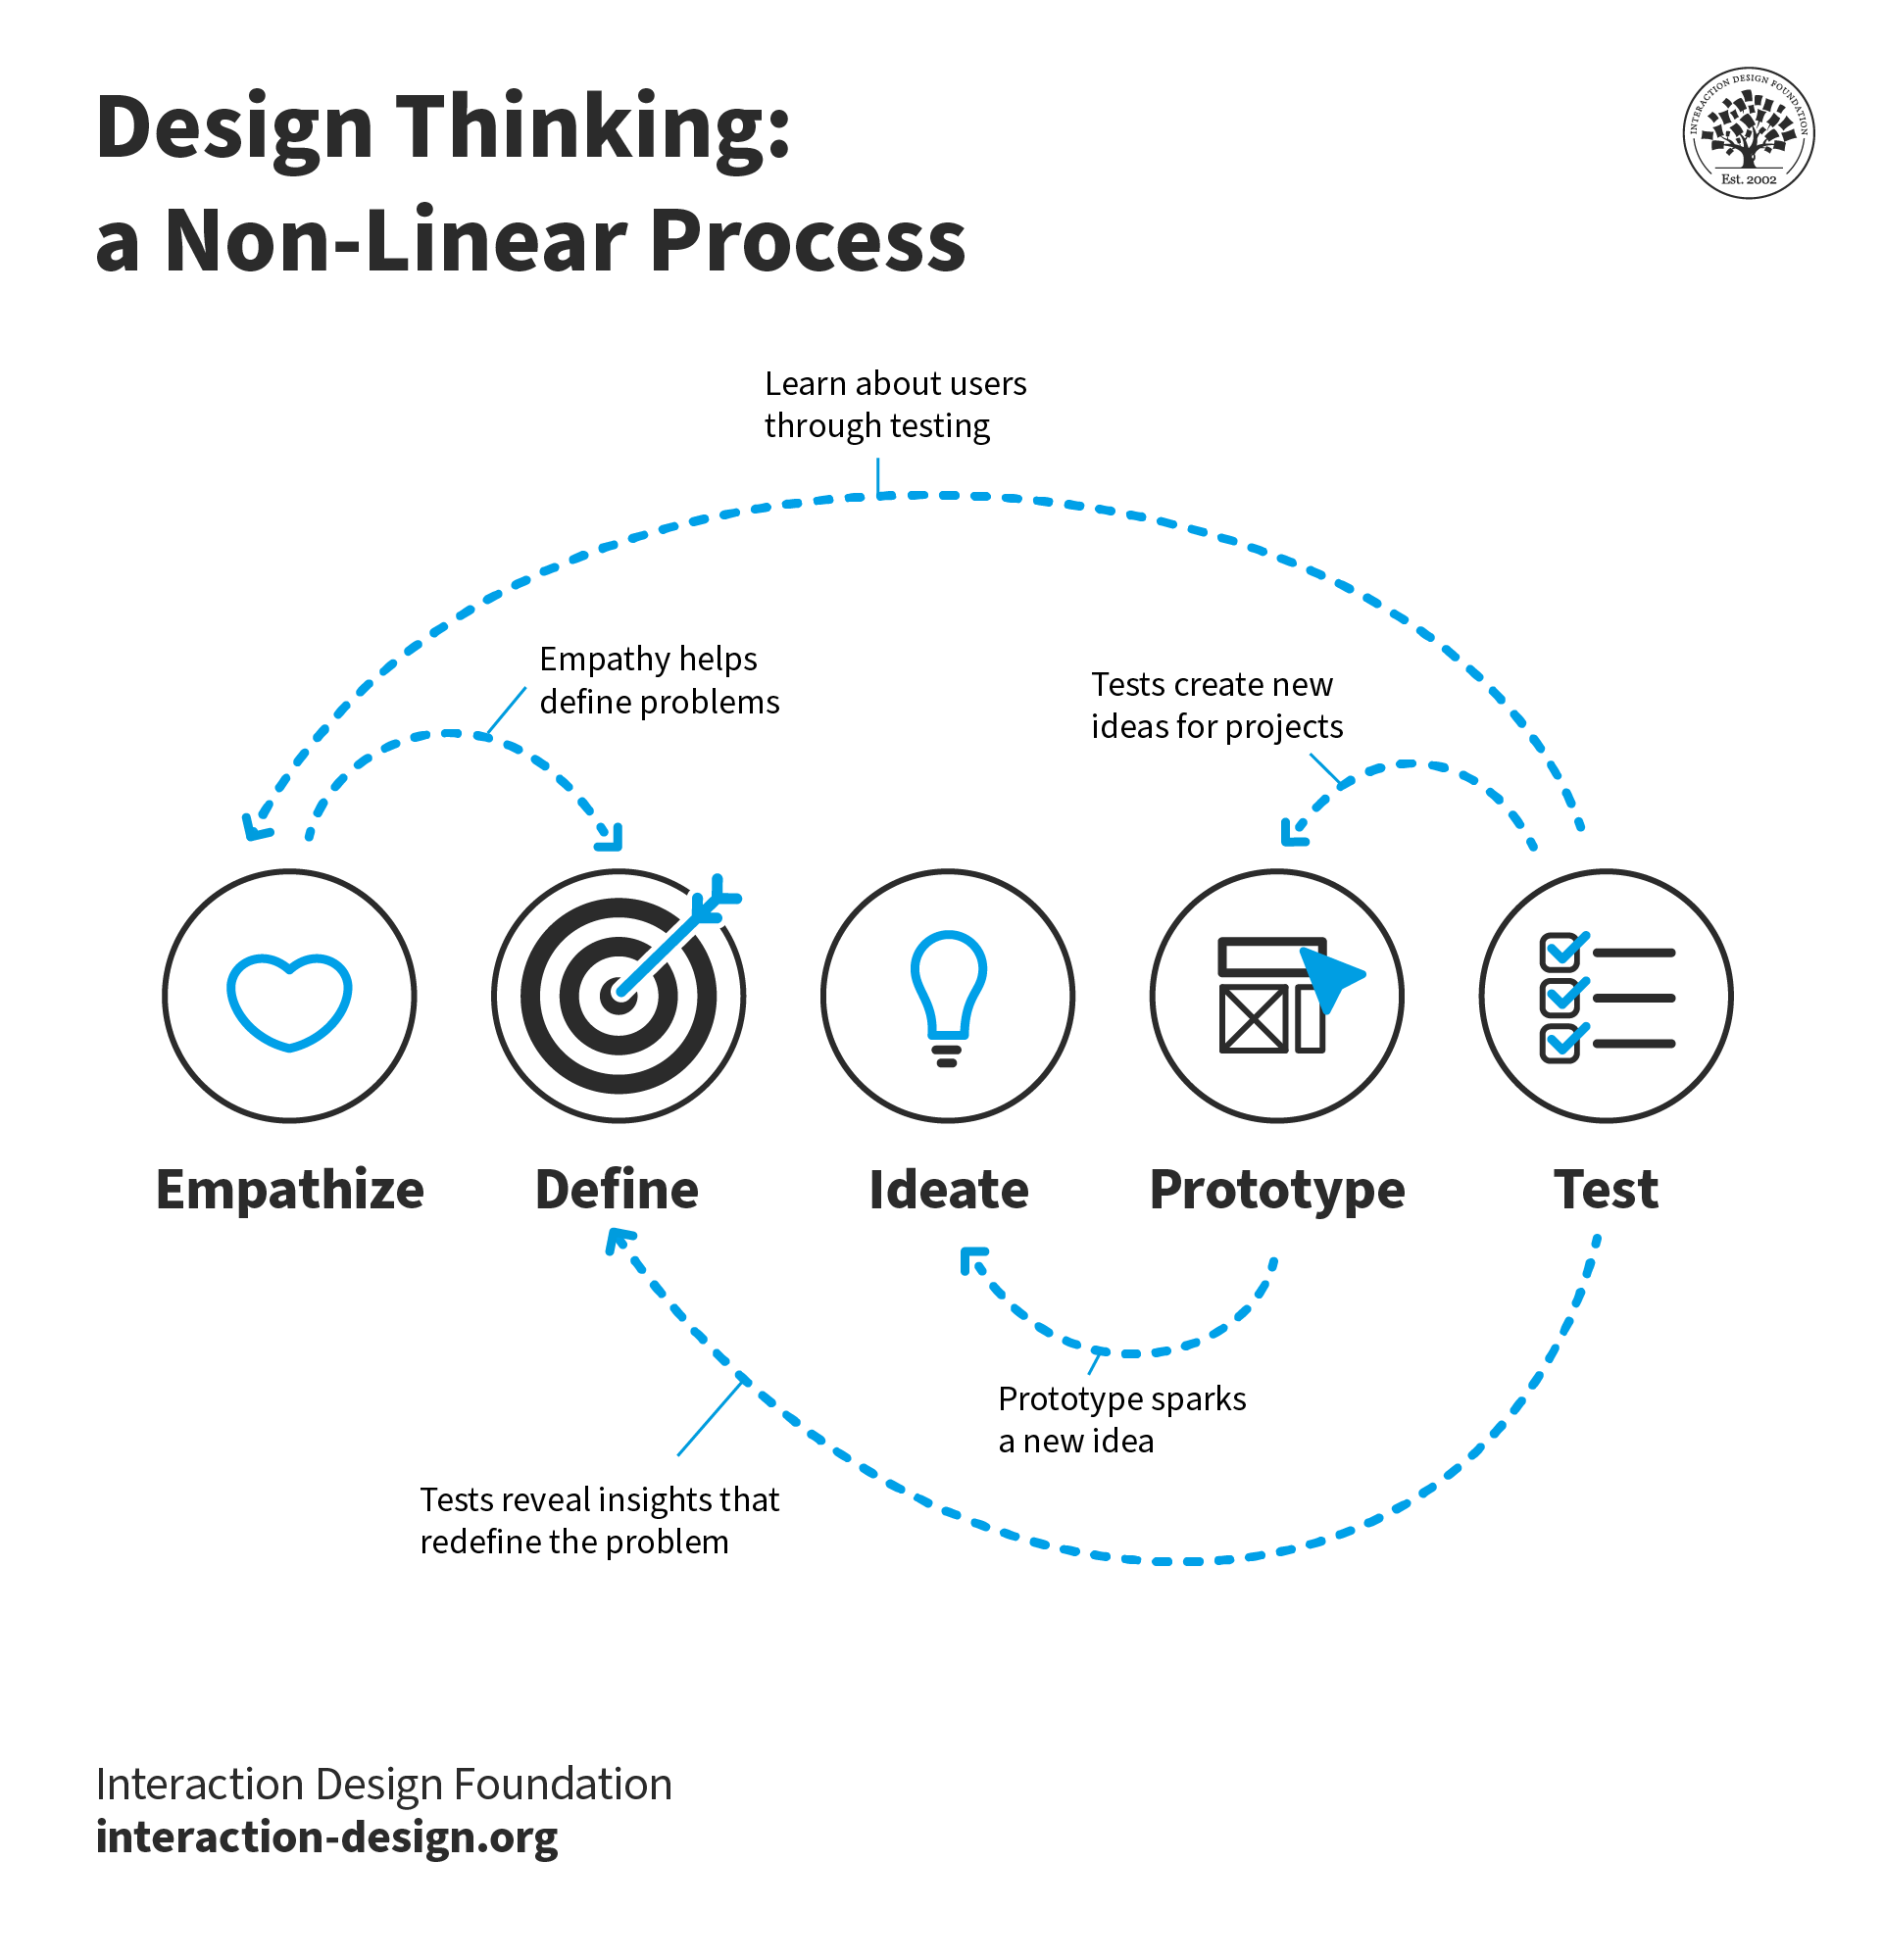 Five stages in the design thinking process.